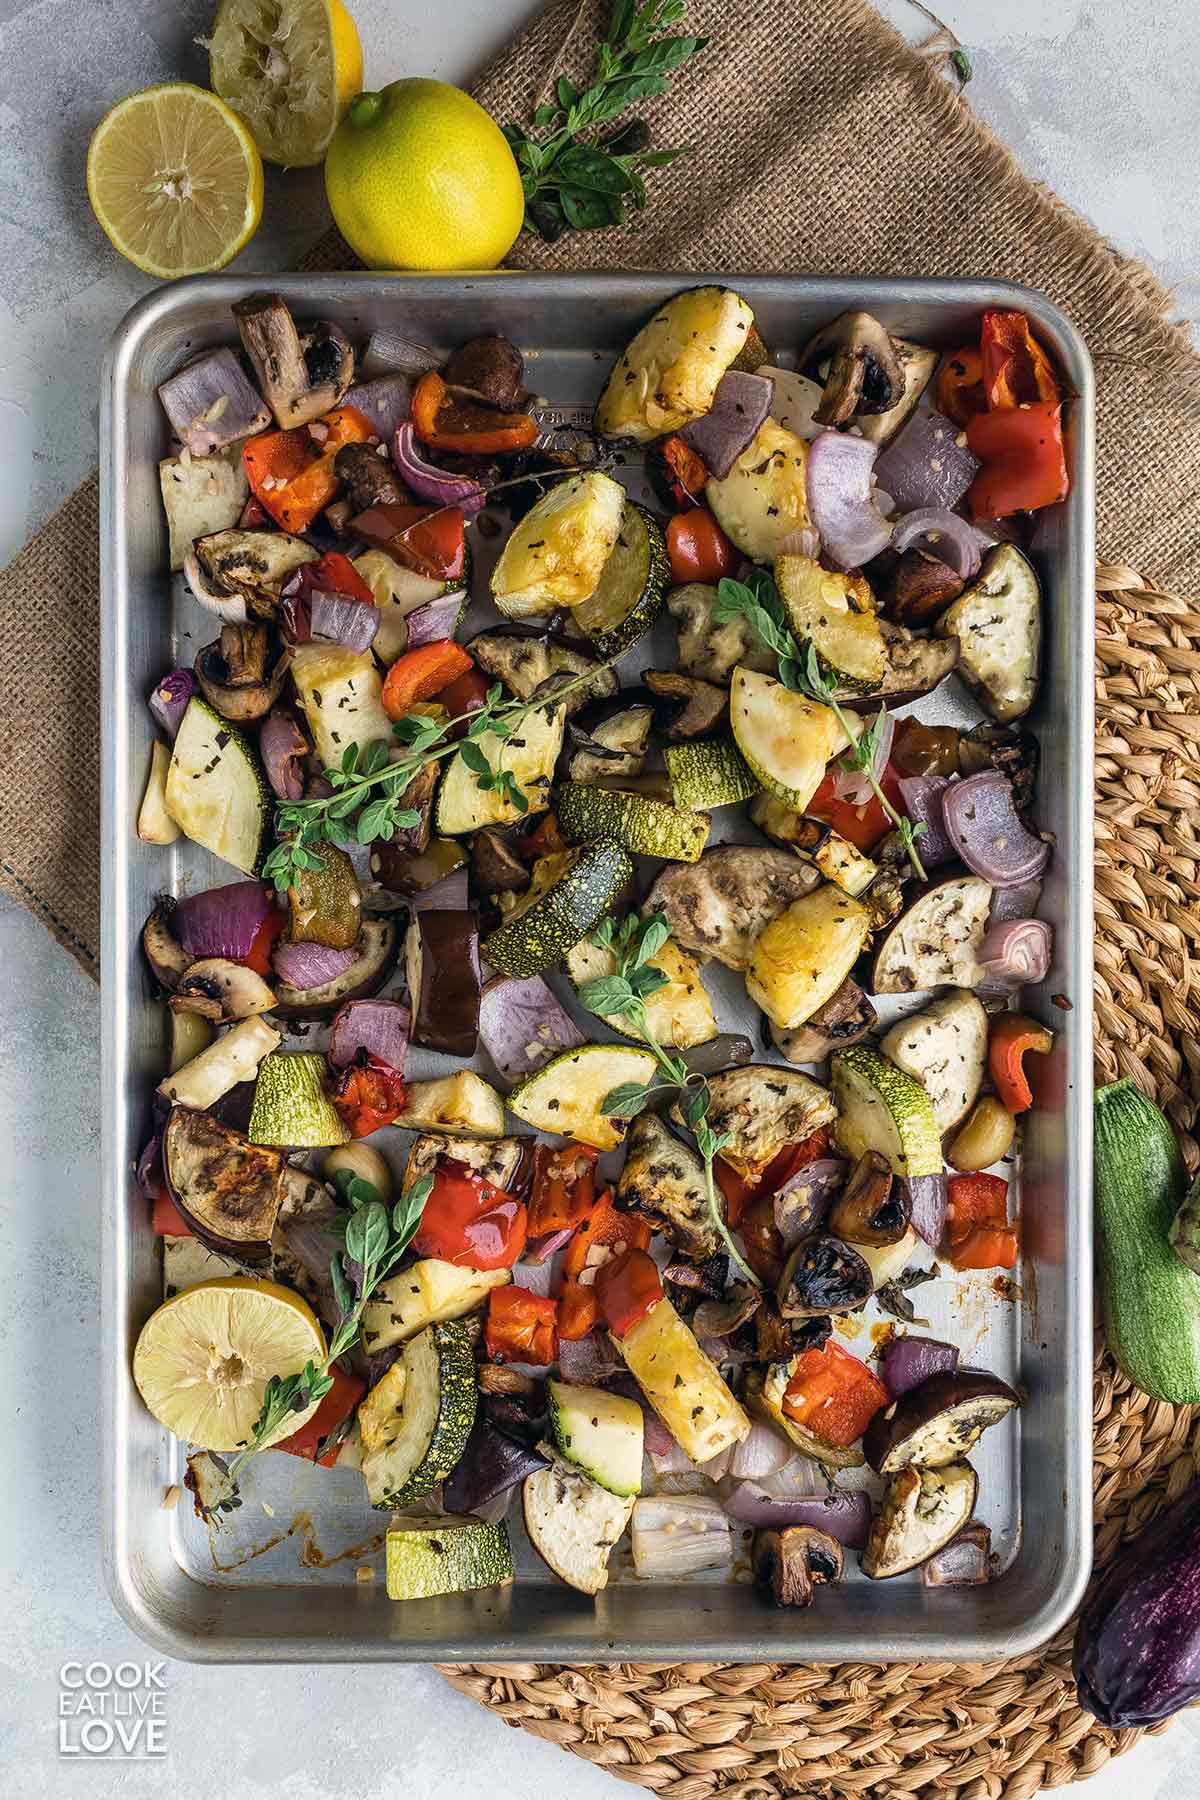 Mediterranean roasted vegetables on baking sheet fresh from the oven.